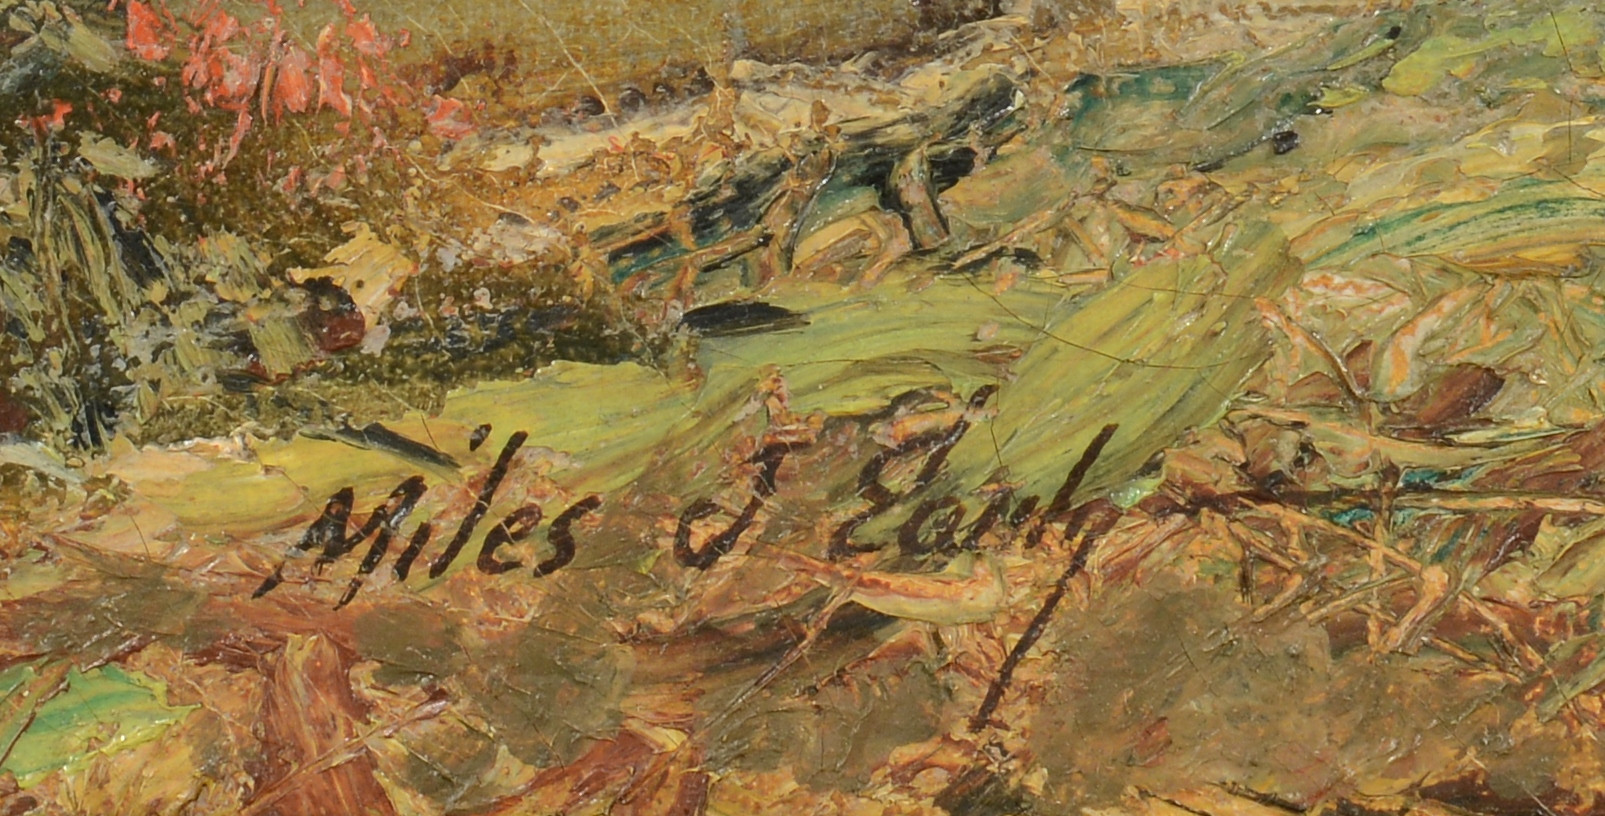 Lot 198: Miles Early Oil on Canvas Landscape